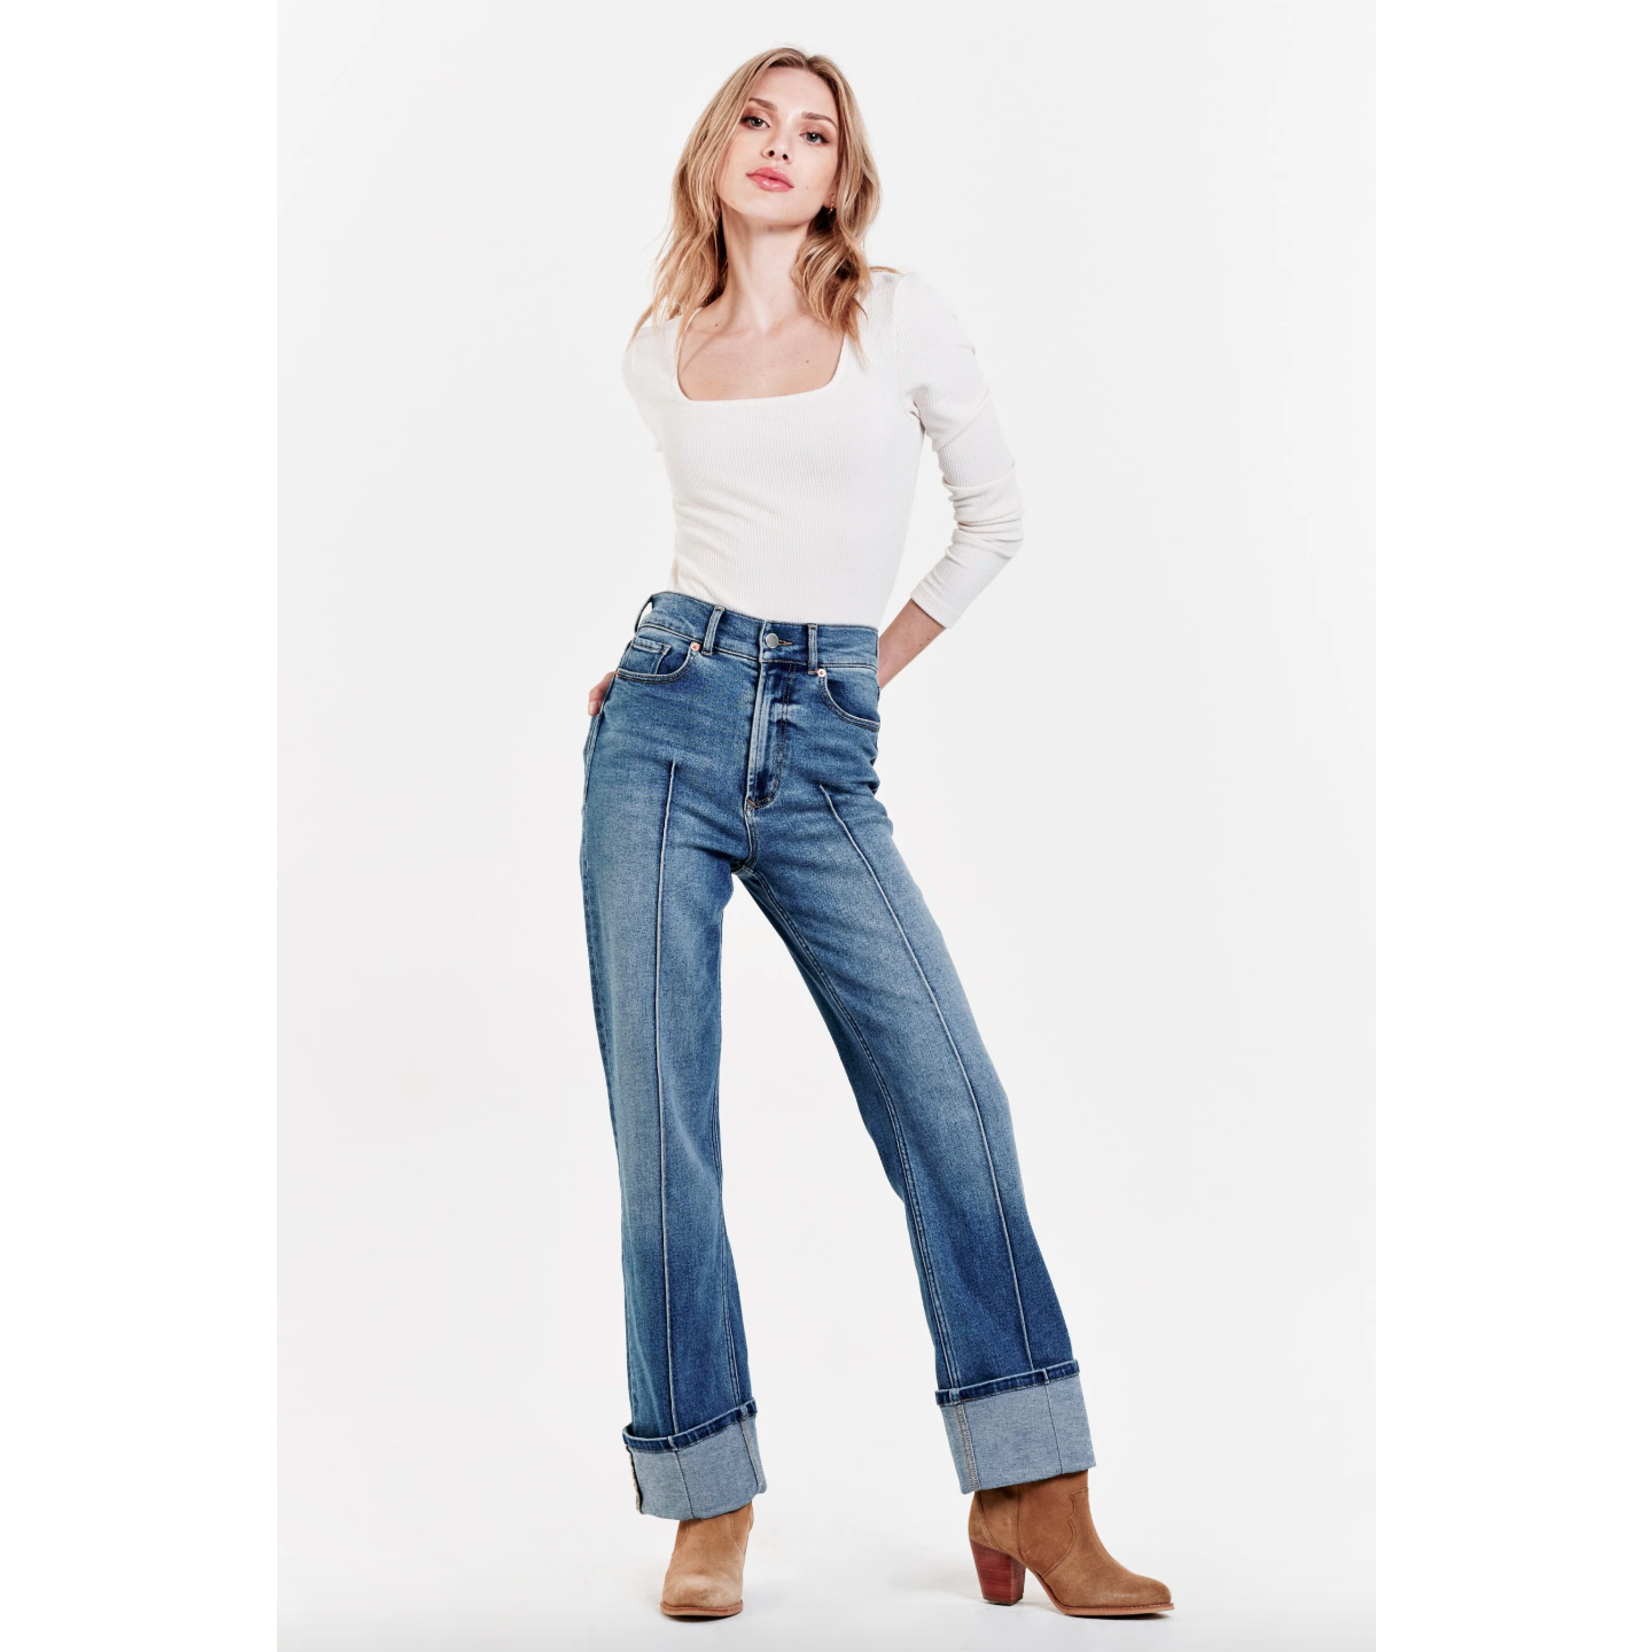 Do these jeans seem big or is this the right fit? : r/PetiteFashionAdvice